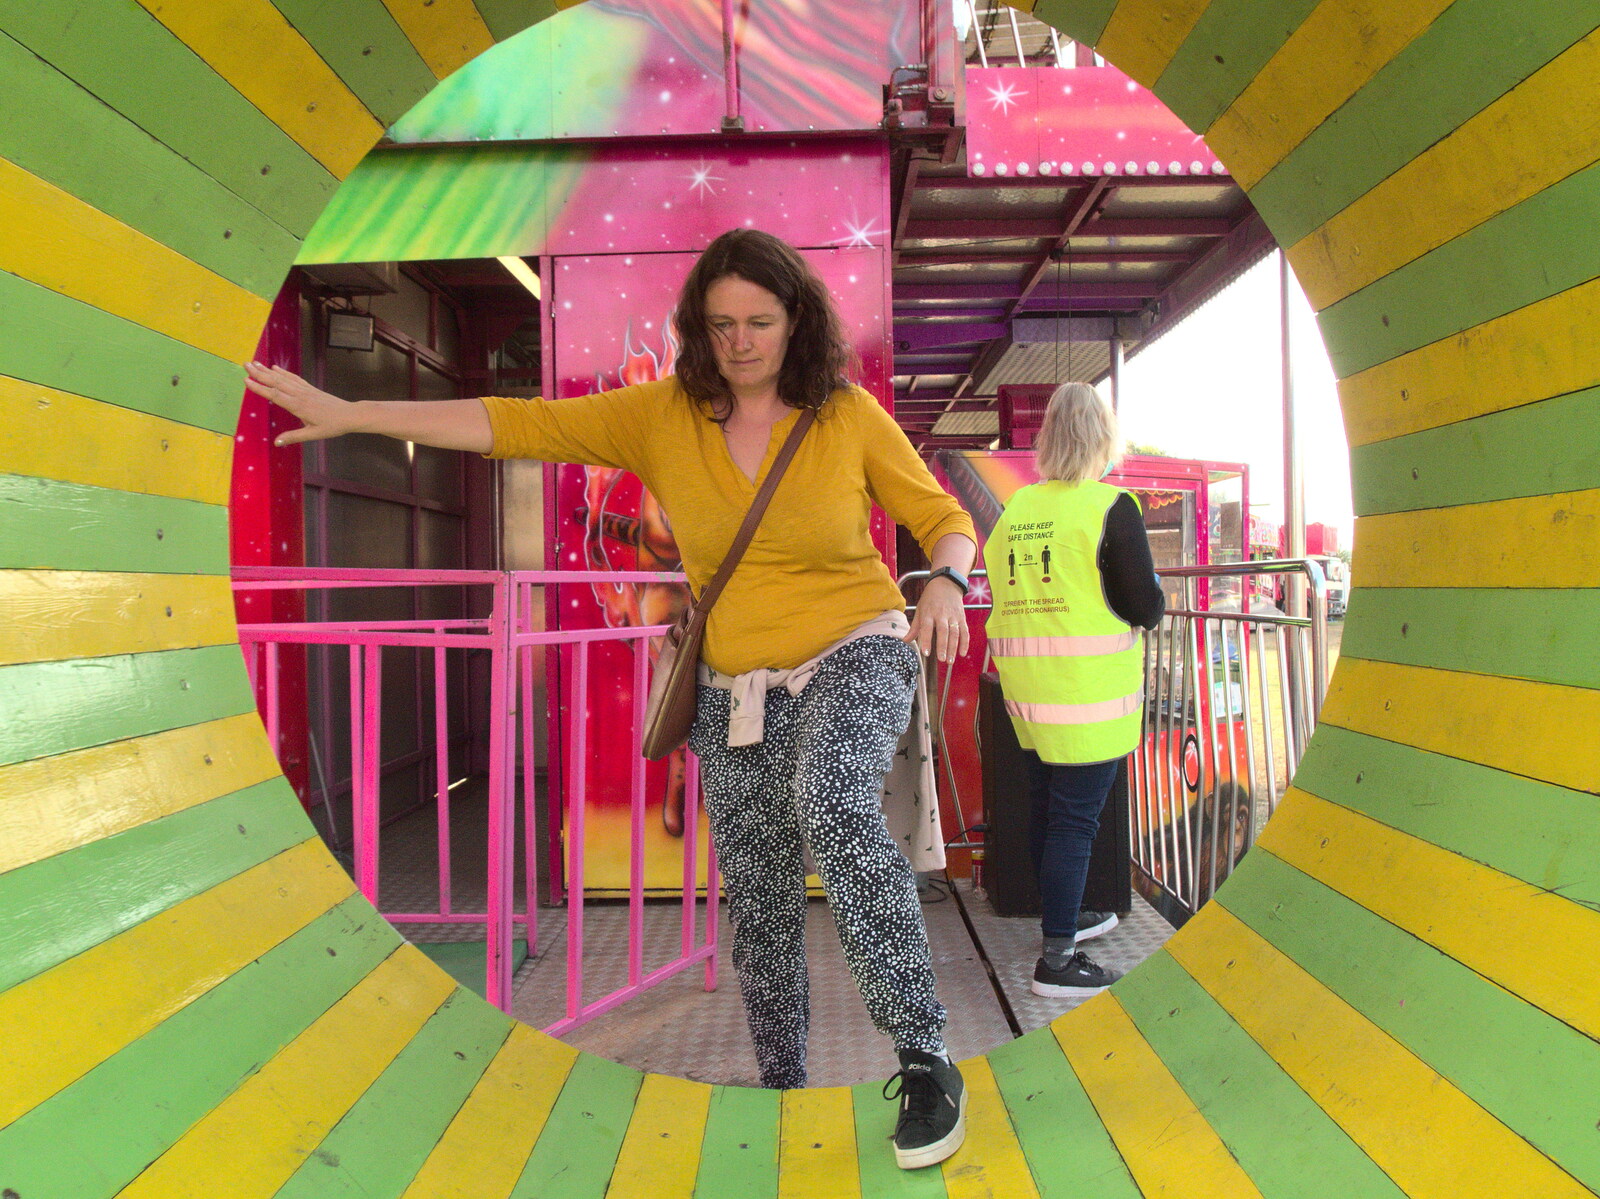 Isobel exits through the spinning wheel from A Few Hours at the Fair, Fair Green, Diss, Norfolk - 5th September 2021